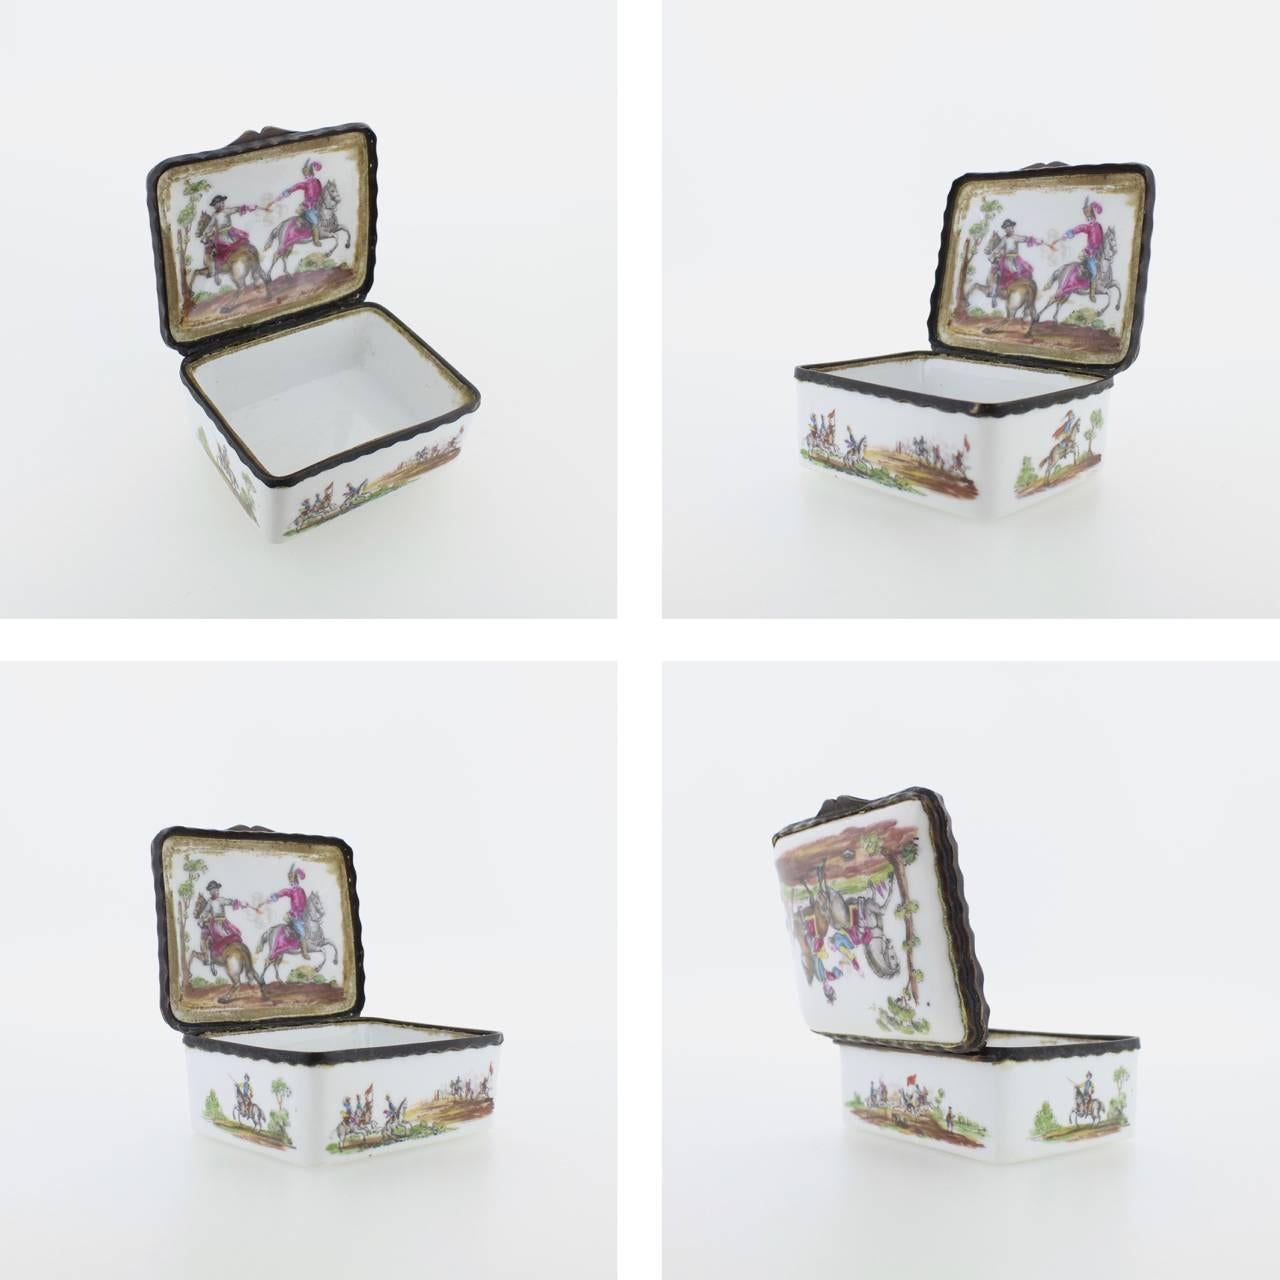 A fine antique French or German porcelain snuff box. 

Dating to the 18th (or possibly early 19th) century.

Decorated throughout with hand-painted military, gunfighting, and horse back engagement scenes.

Measure: Width ca. 2 5/8 in.


 